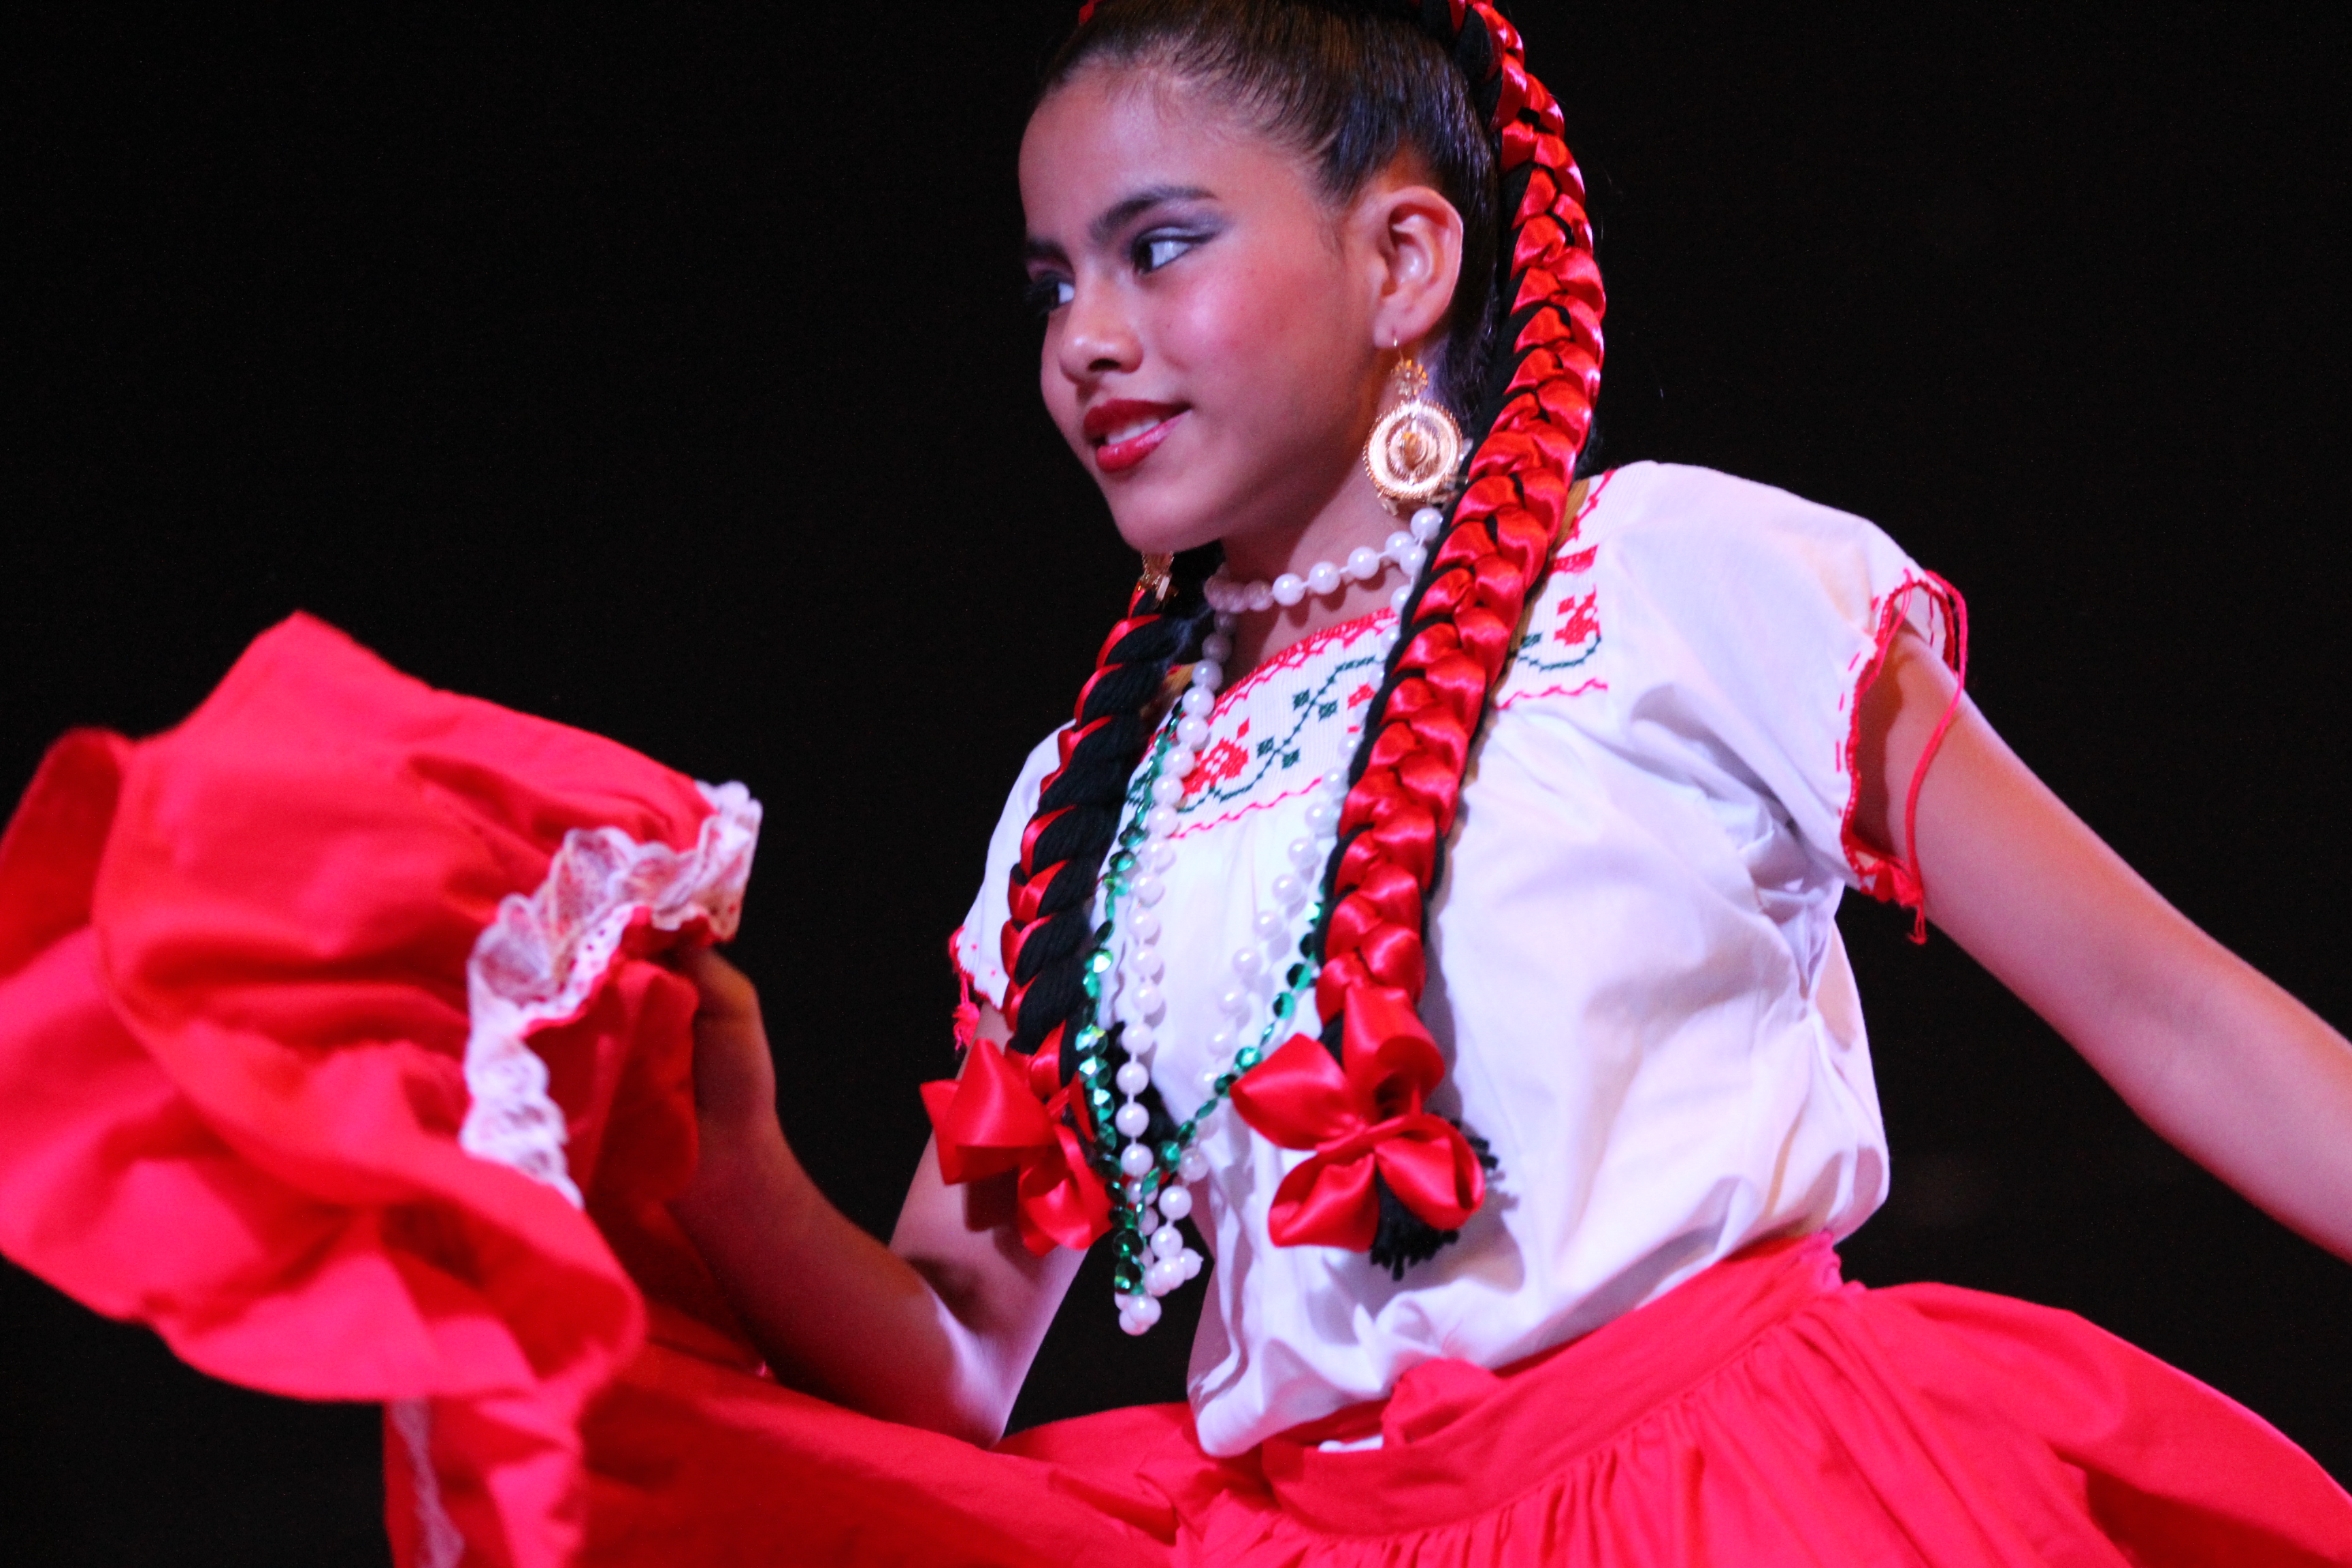 girl dressed in traditional Mexican heritage outfit performs at the Mexican Heritage Fiesta in Port Arthur, Texas